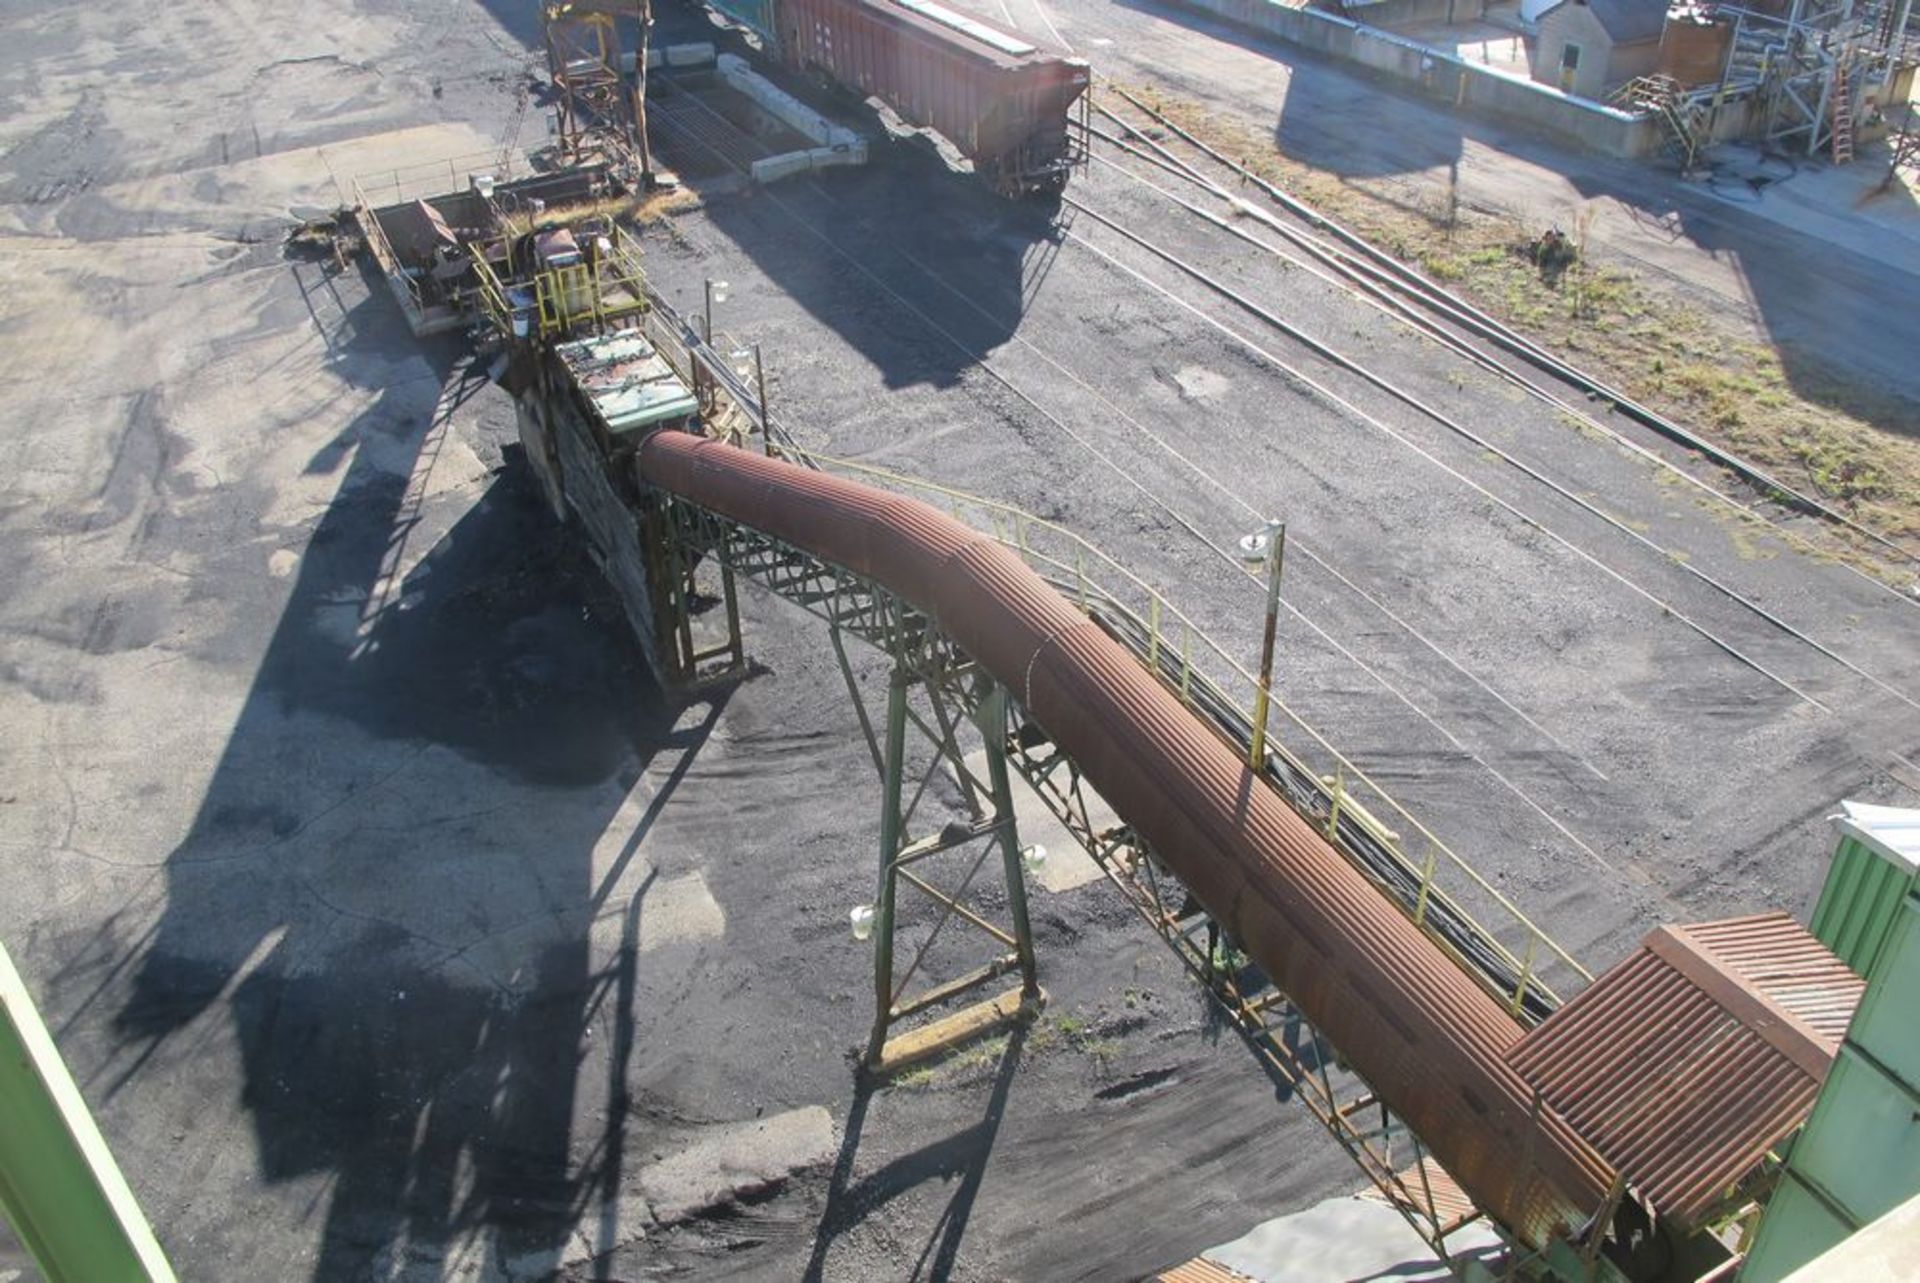 LOT OF 3 COAL TRANSFER INCLINE CONVEYORS, 2 HOPPERSAND COAL CRUSHER SUPPORT COLUMNS, COAL PITTO - Image 7 of 8